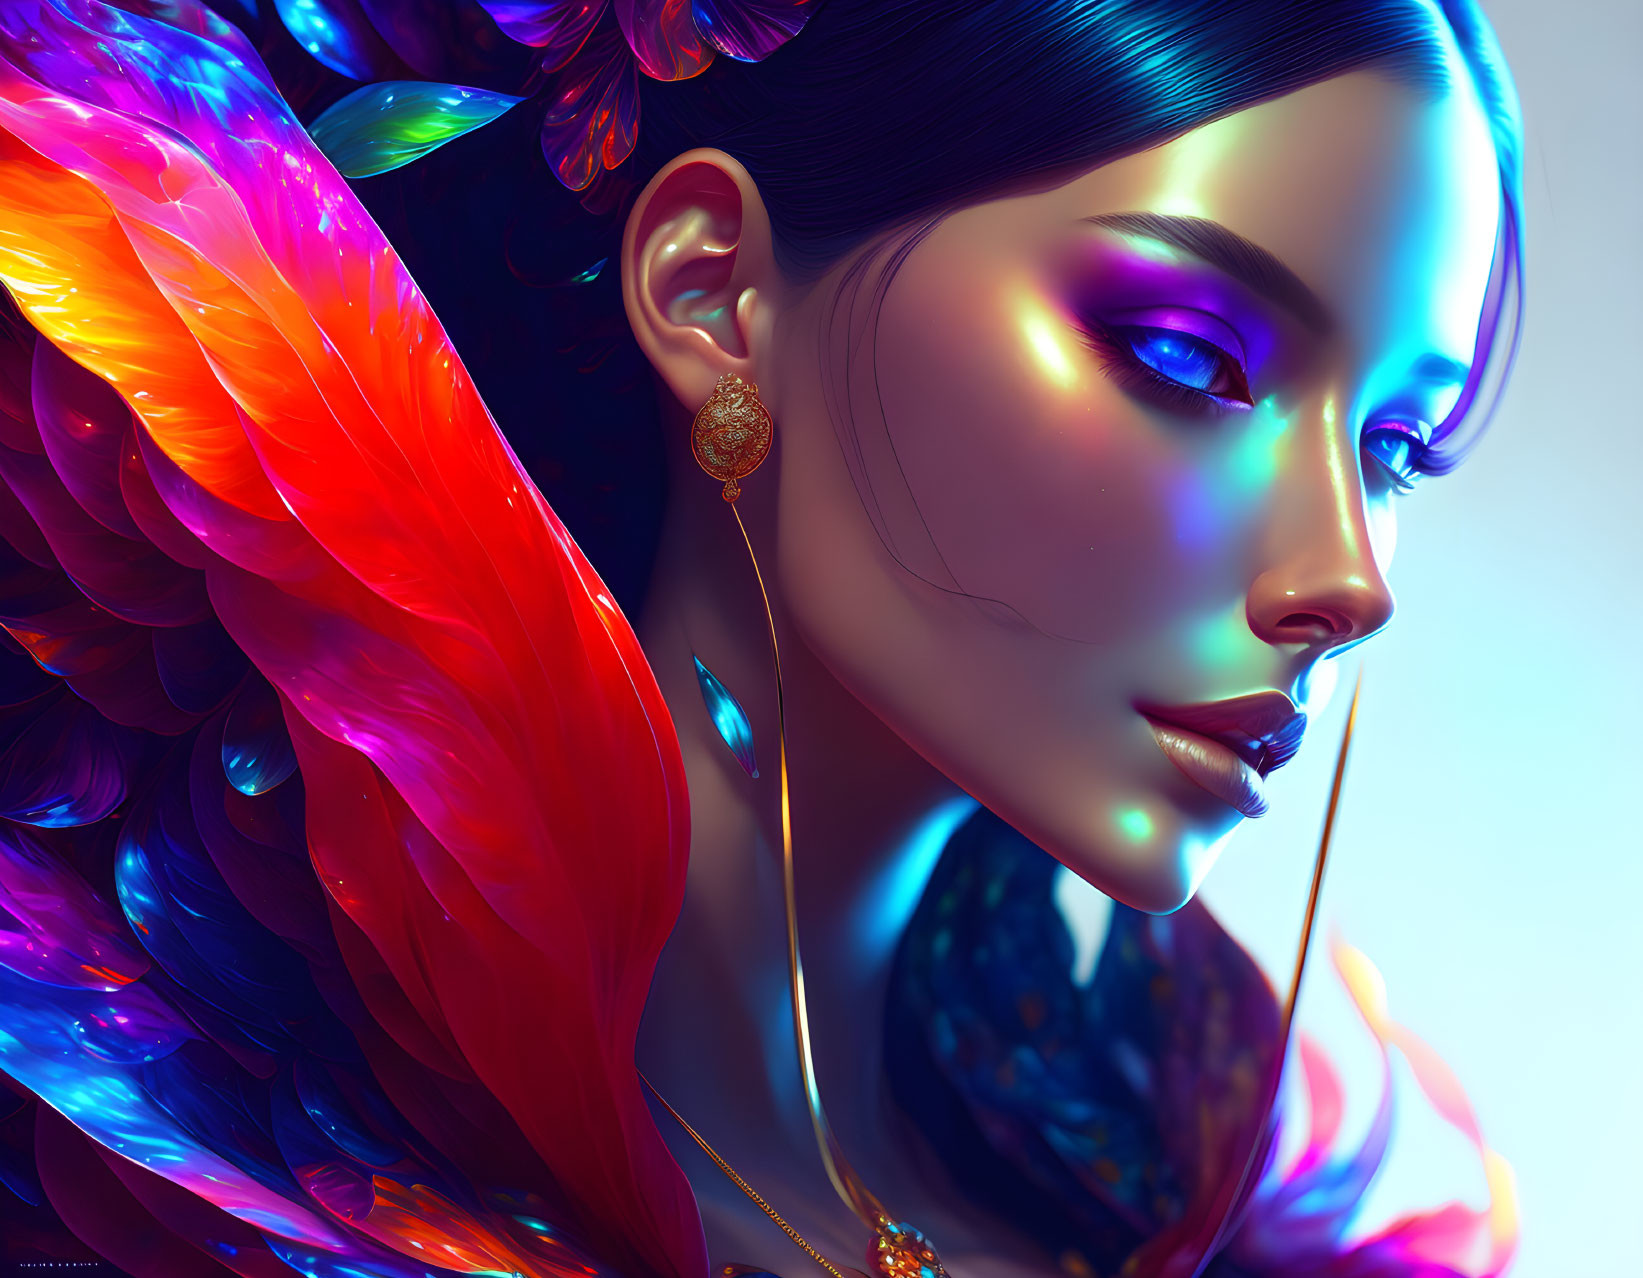 Colorful portrait of woman with multicolored wings and blue skin wearing gold jewelry